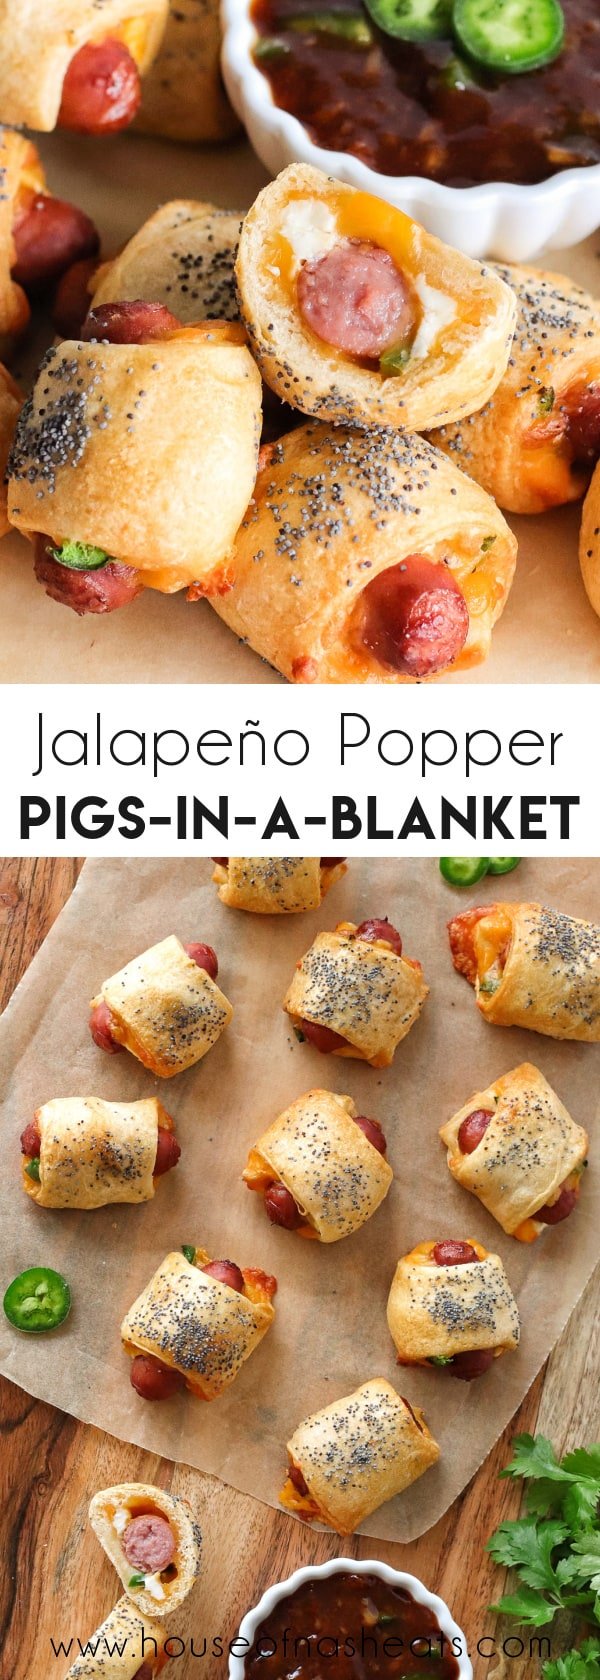 A collage of images of jalapeno popper pigs in a blanket with text overlay.